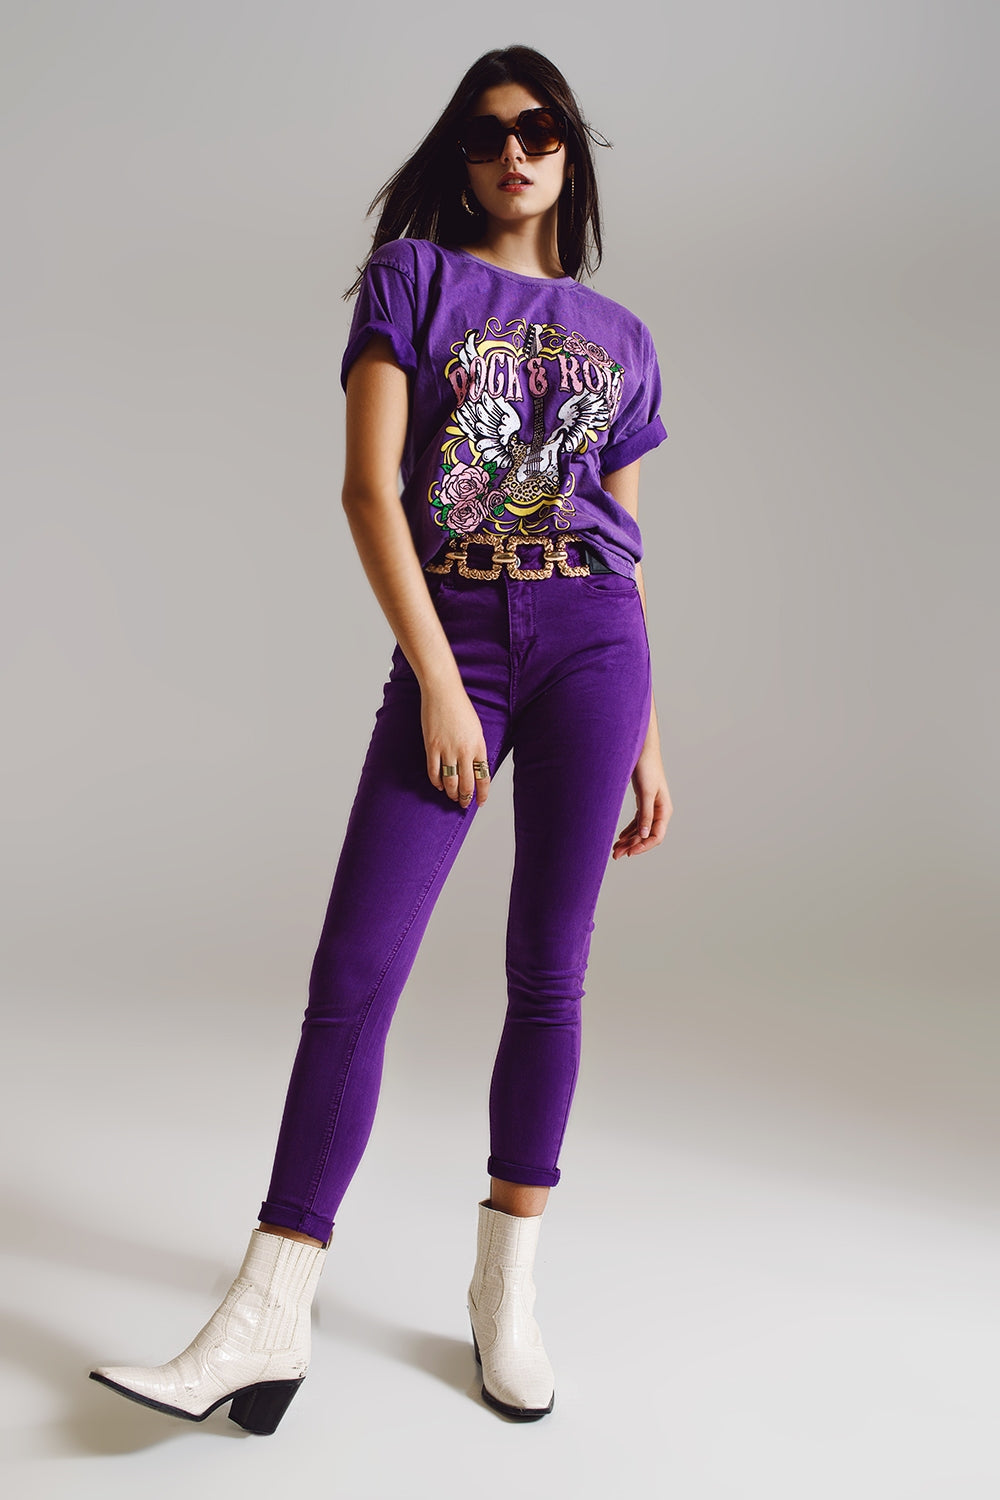 Vintage Rock and Roll T-shirt con stampa in viola